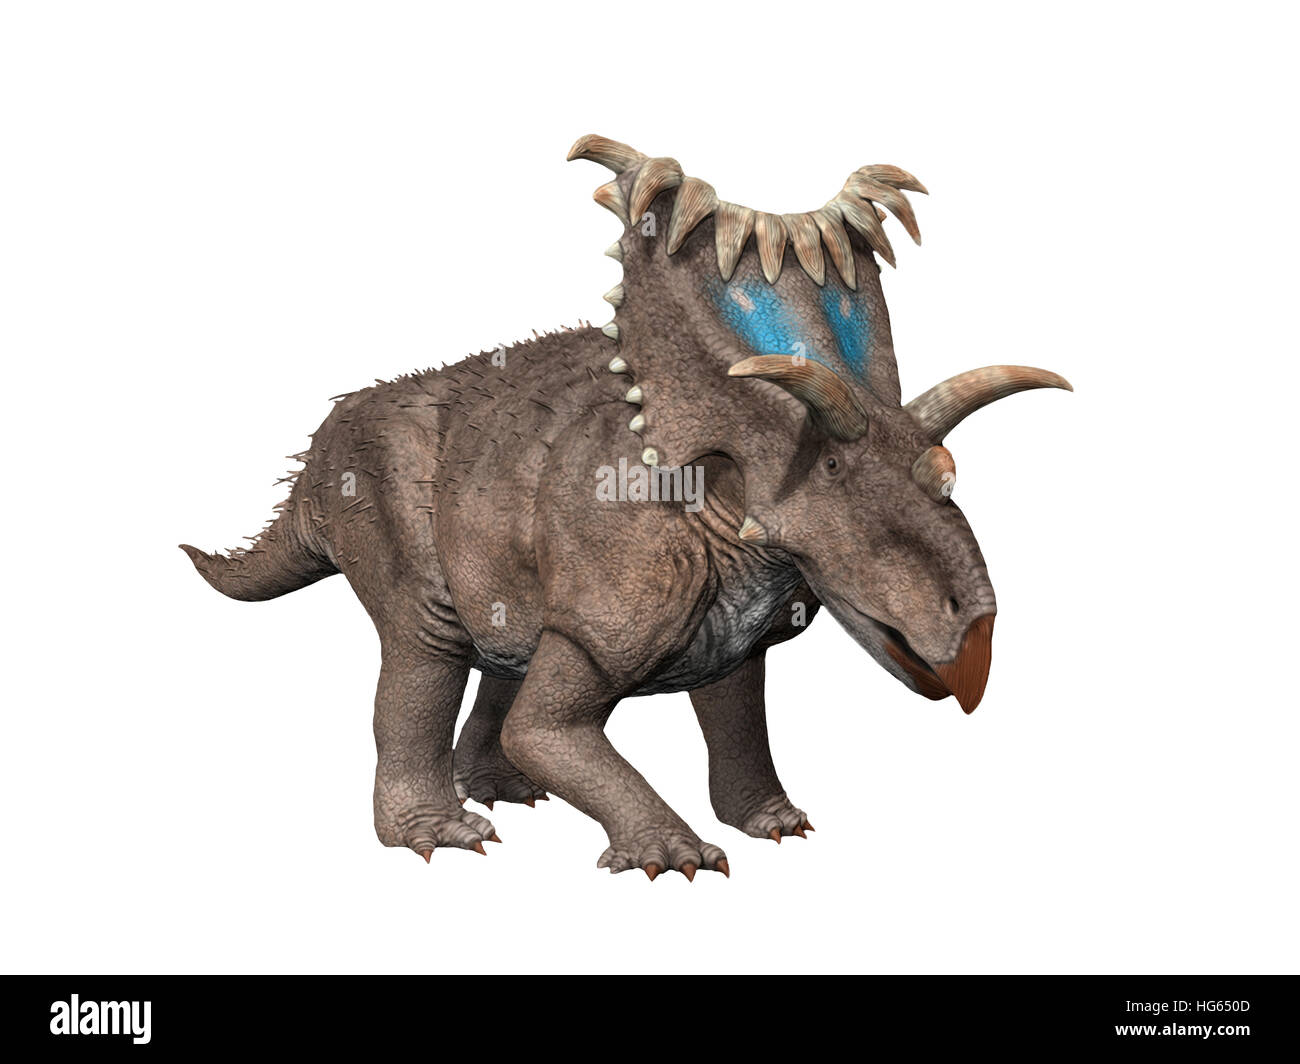 Kosmoceratops is a ceratopsian dinosaur from the Late Cretaceous period. Stock Photo